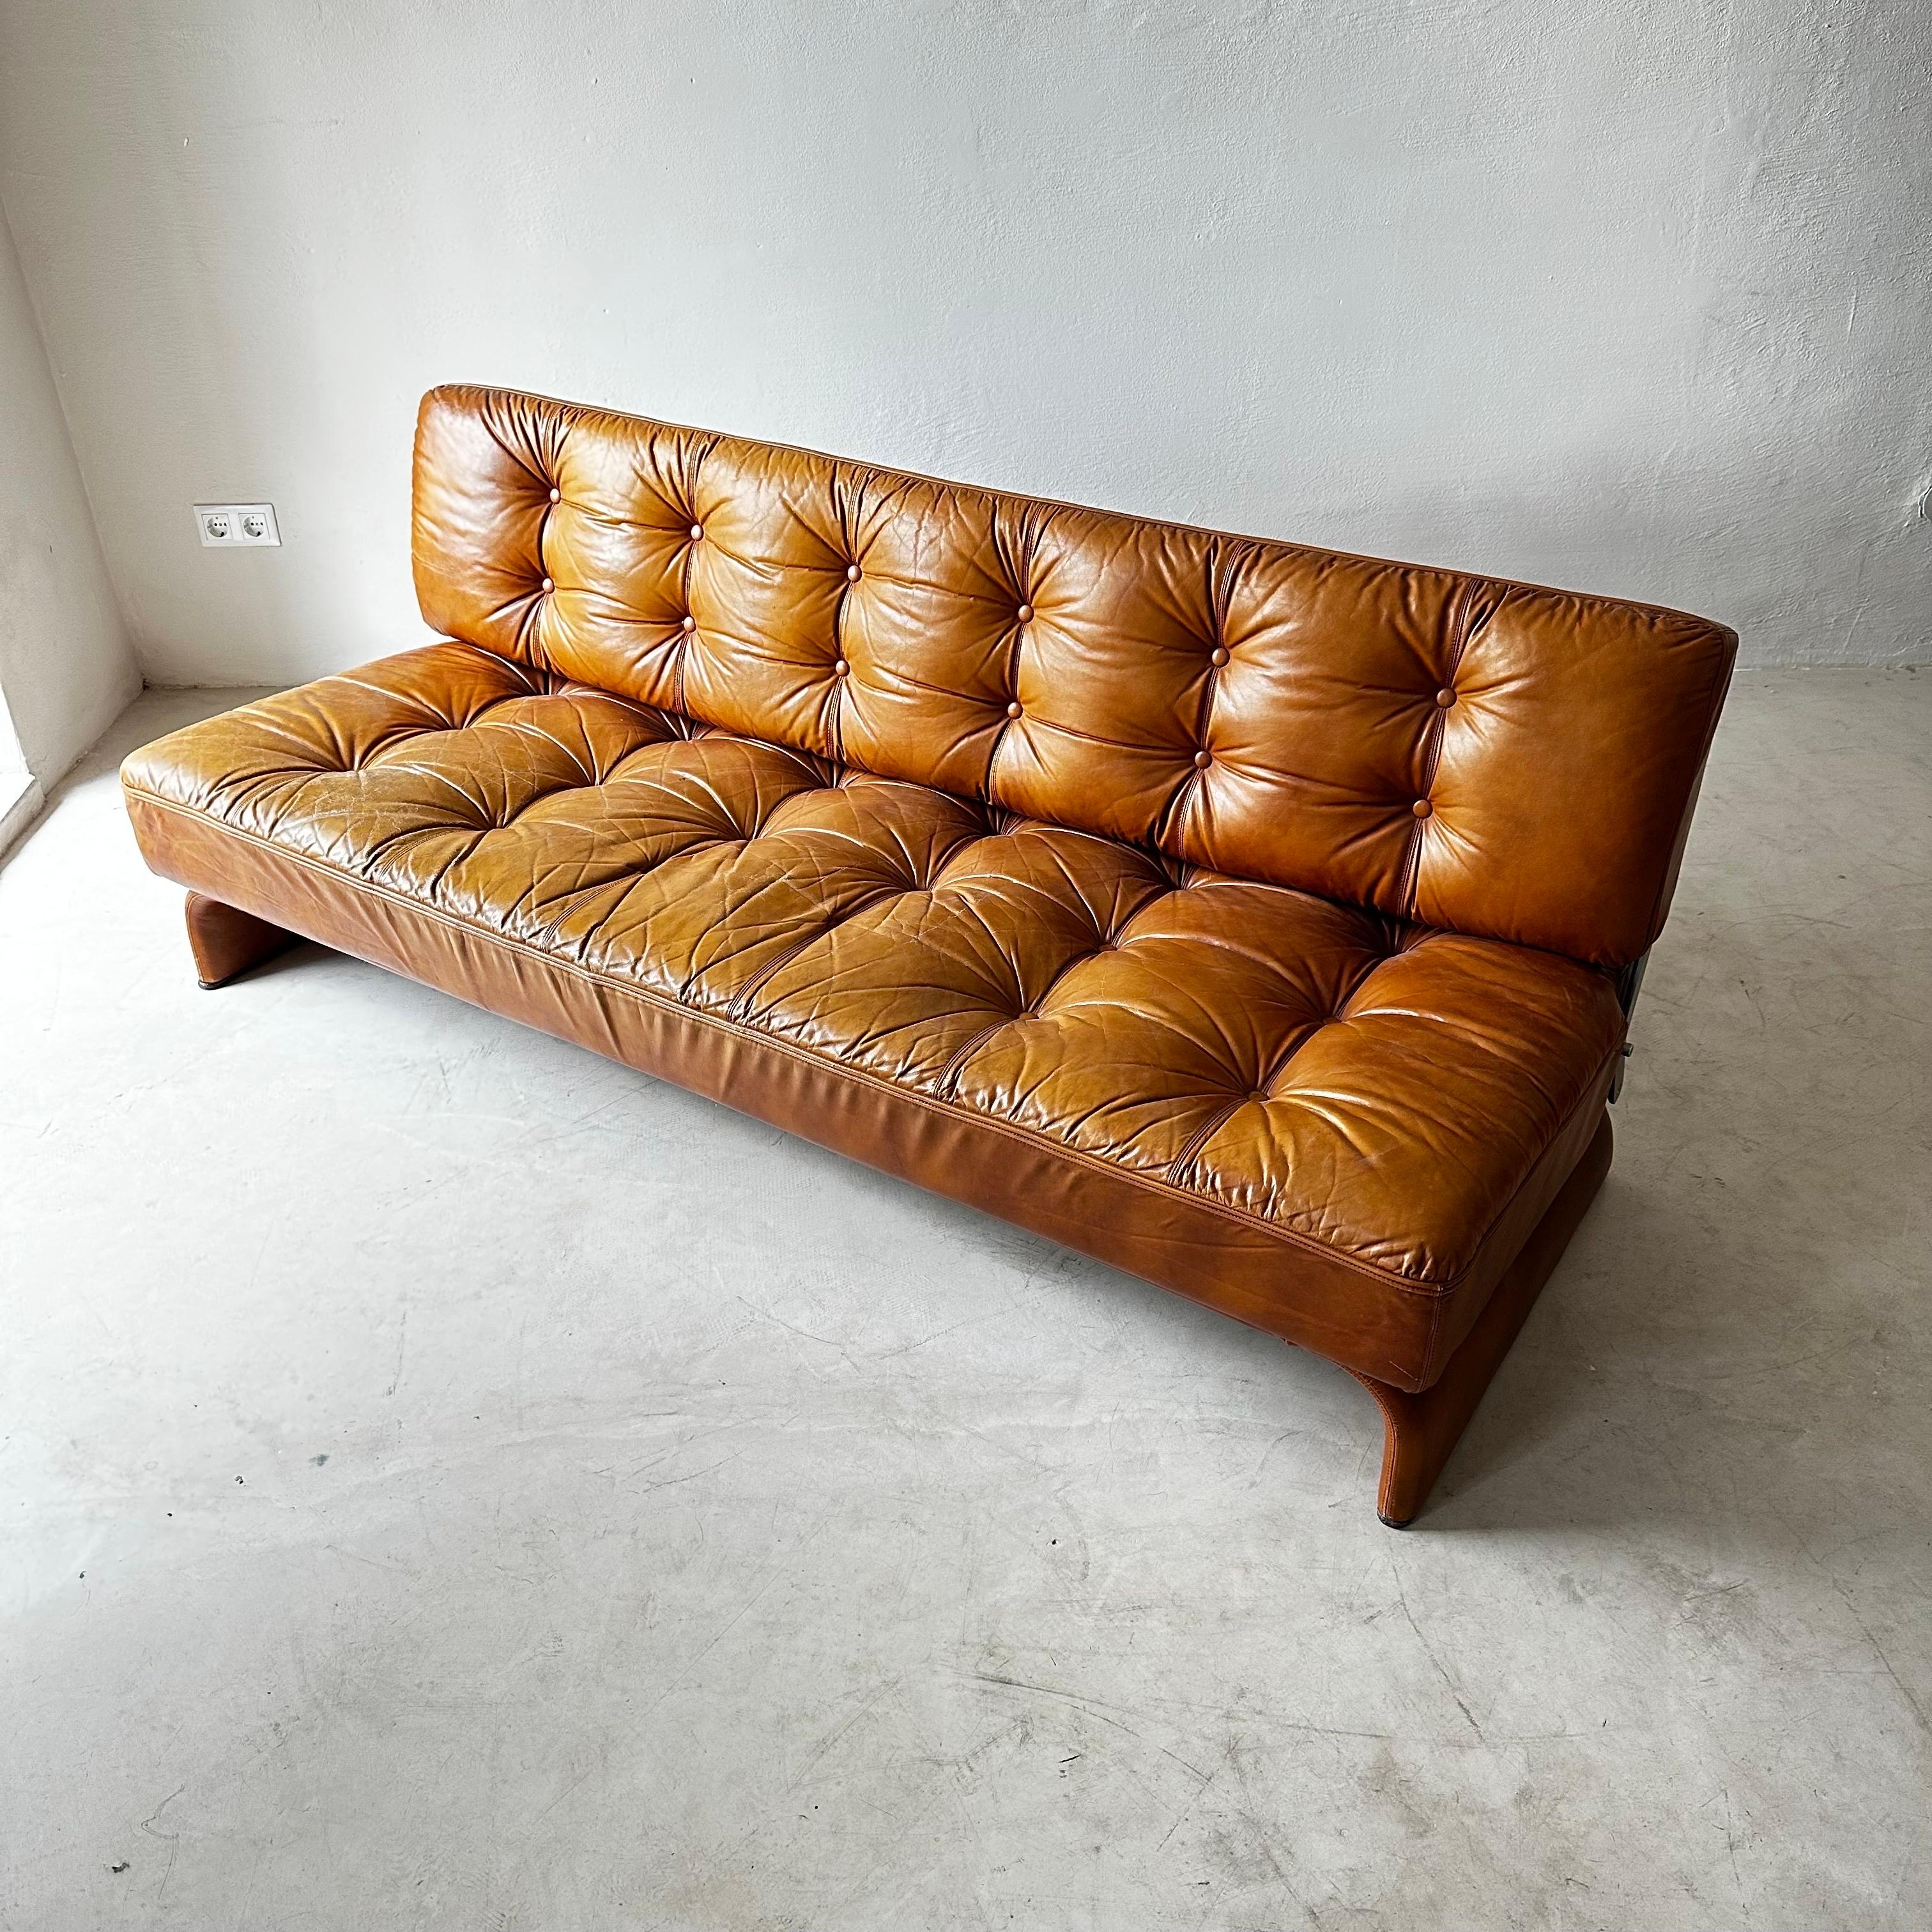 Johannes Spalt for Wittmann 'Constanze' Sofa in Cognac Leather, Austria 1970s. Patinated leather in very nice condition.